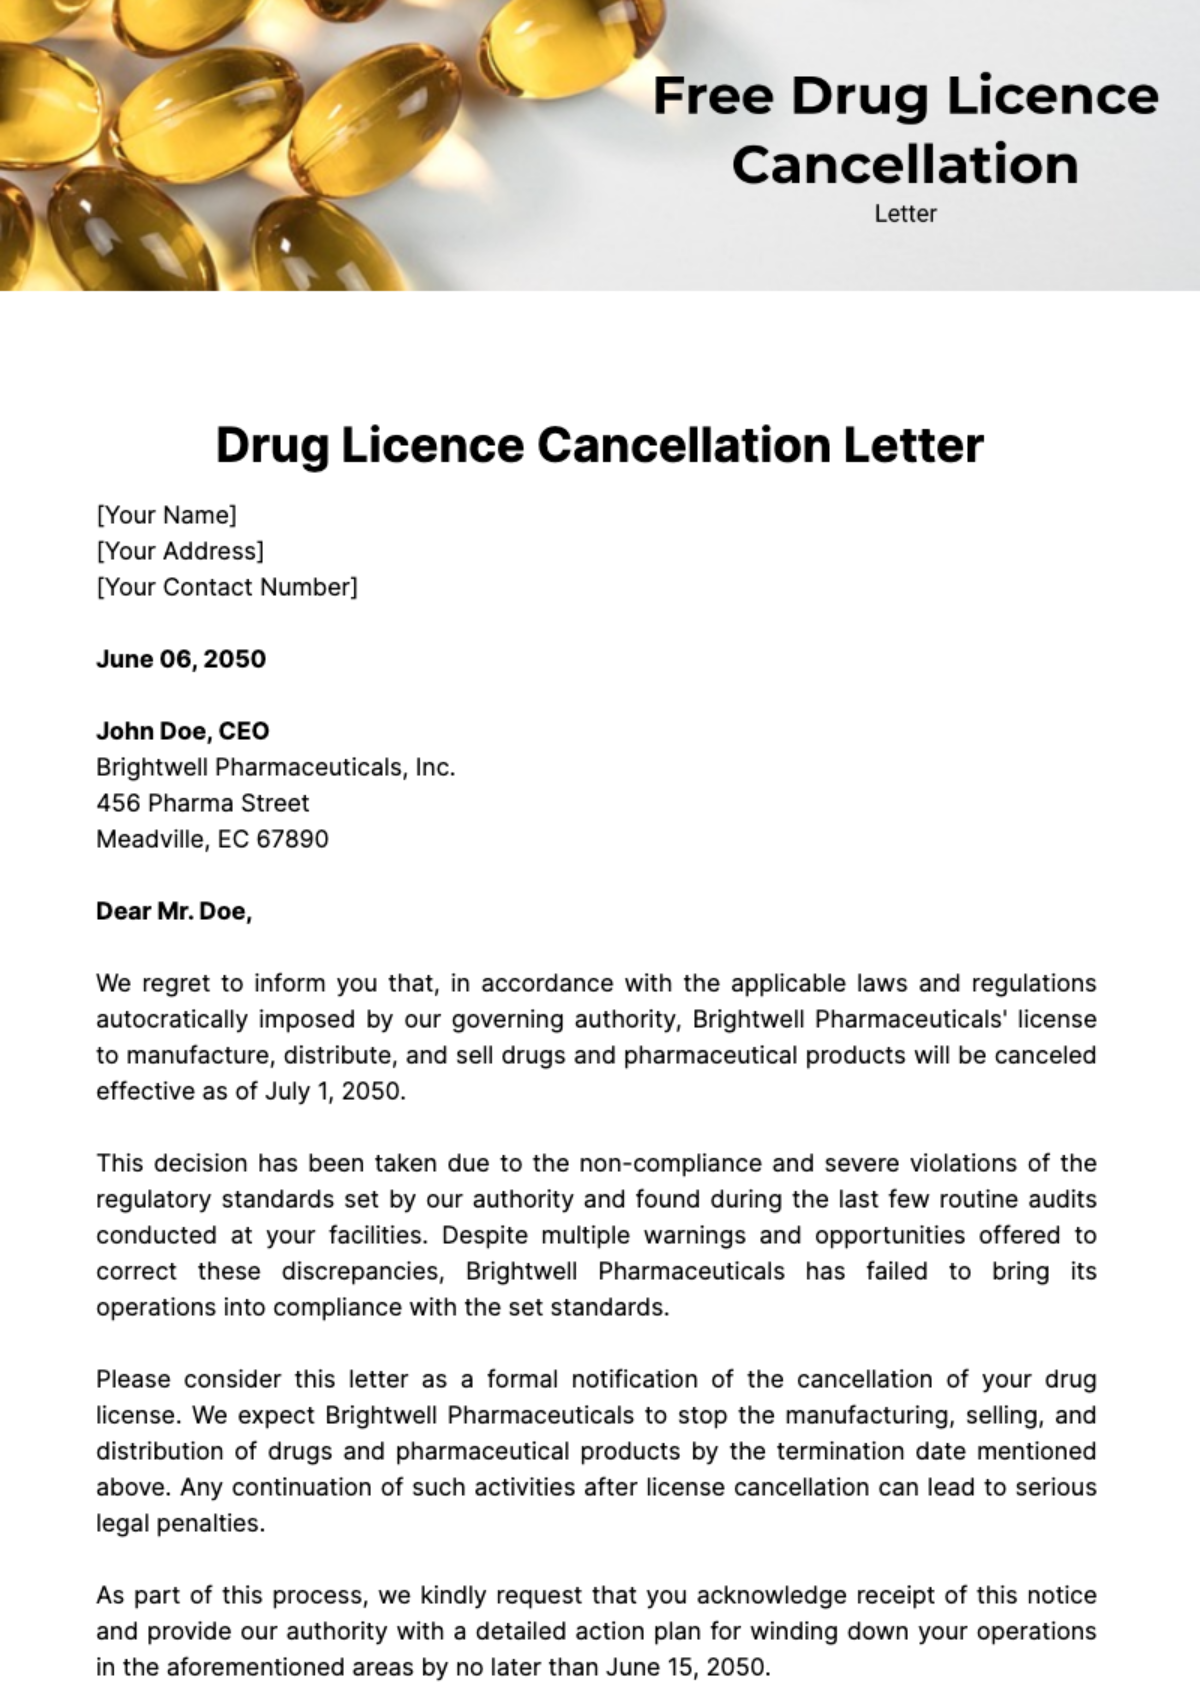 Free Drug Licence Cancellation Letter Template